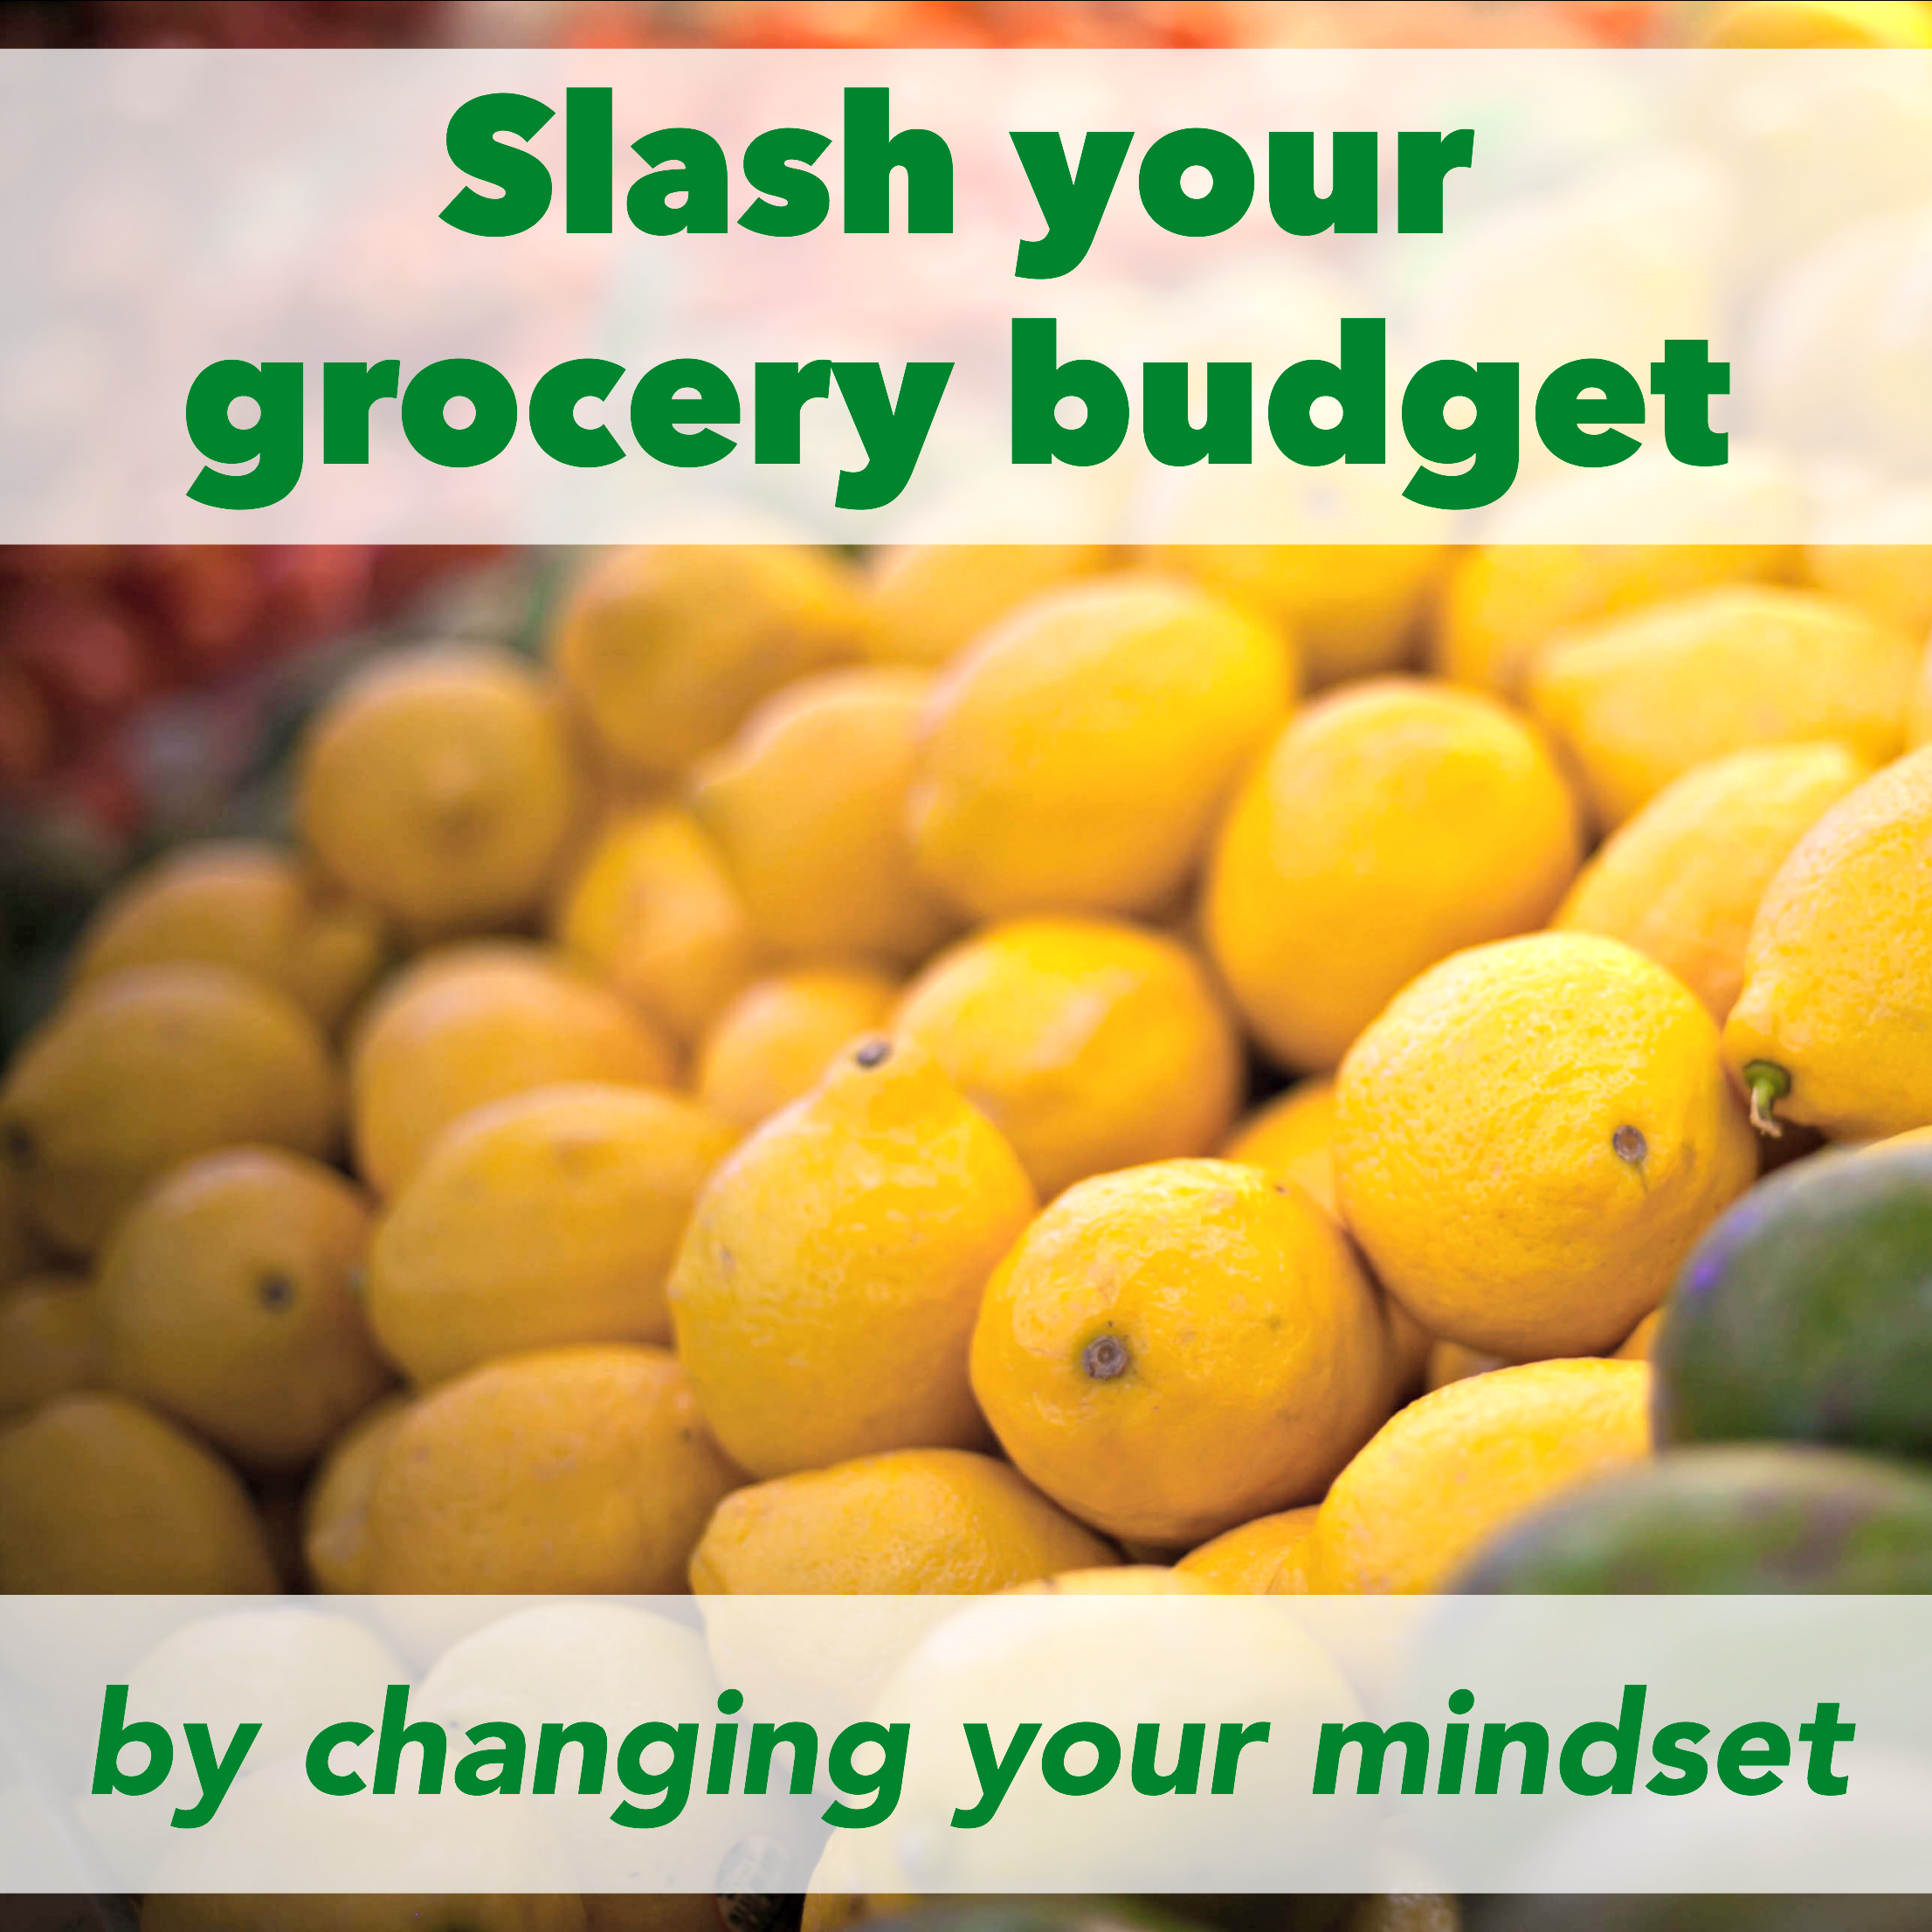 Tips for saving money on groceries by changing your mentality about grocery shopping